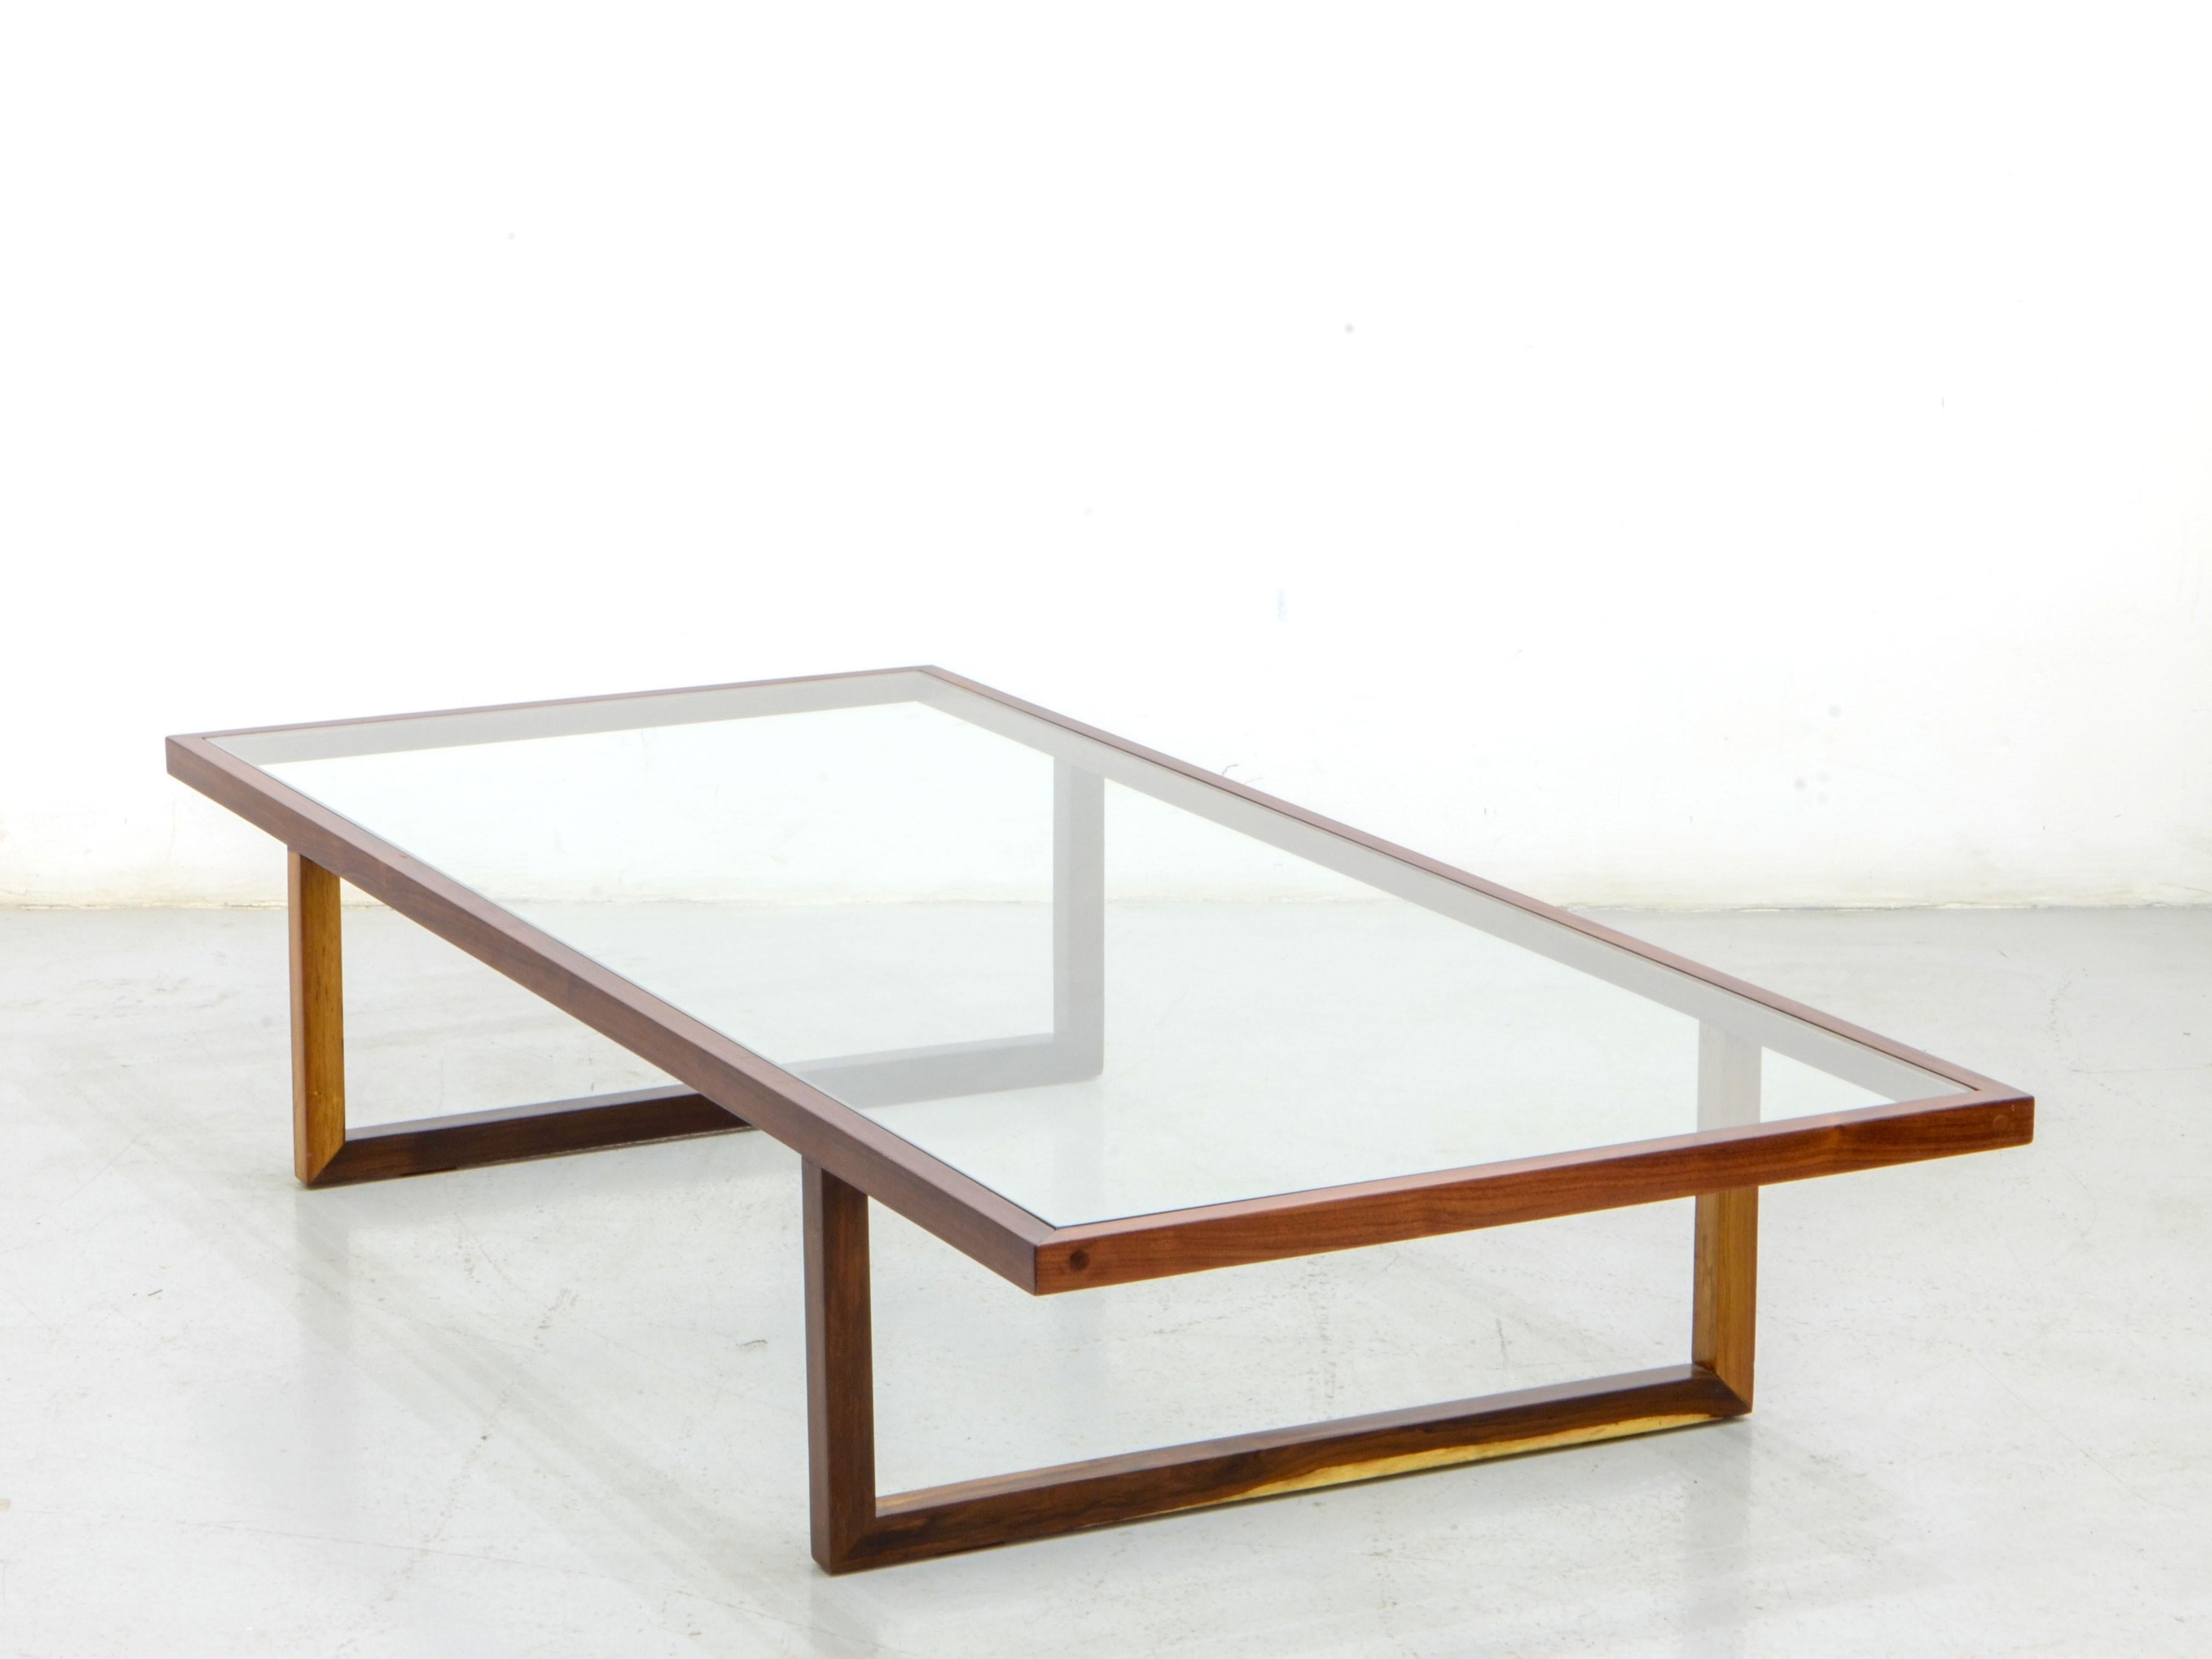 The simple lines and the overall lightness of this coffee table are both signatures of Joaquim Tenreiro's work. This is a piece that also reflects the craft and wisdom in the use of tropical wood, taking the most out of its possibilities and